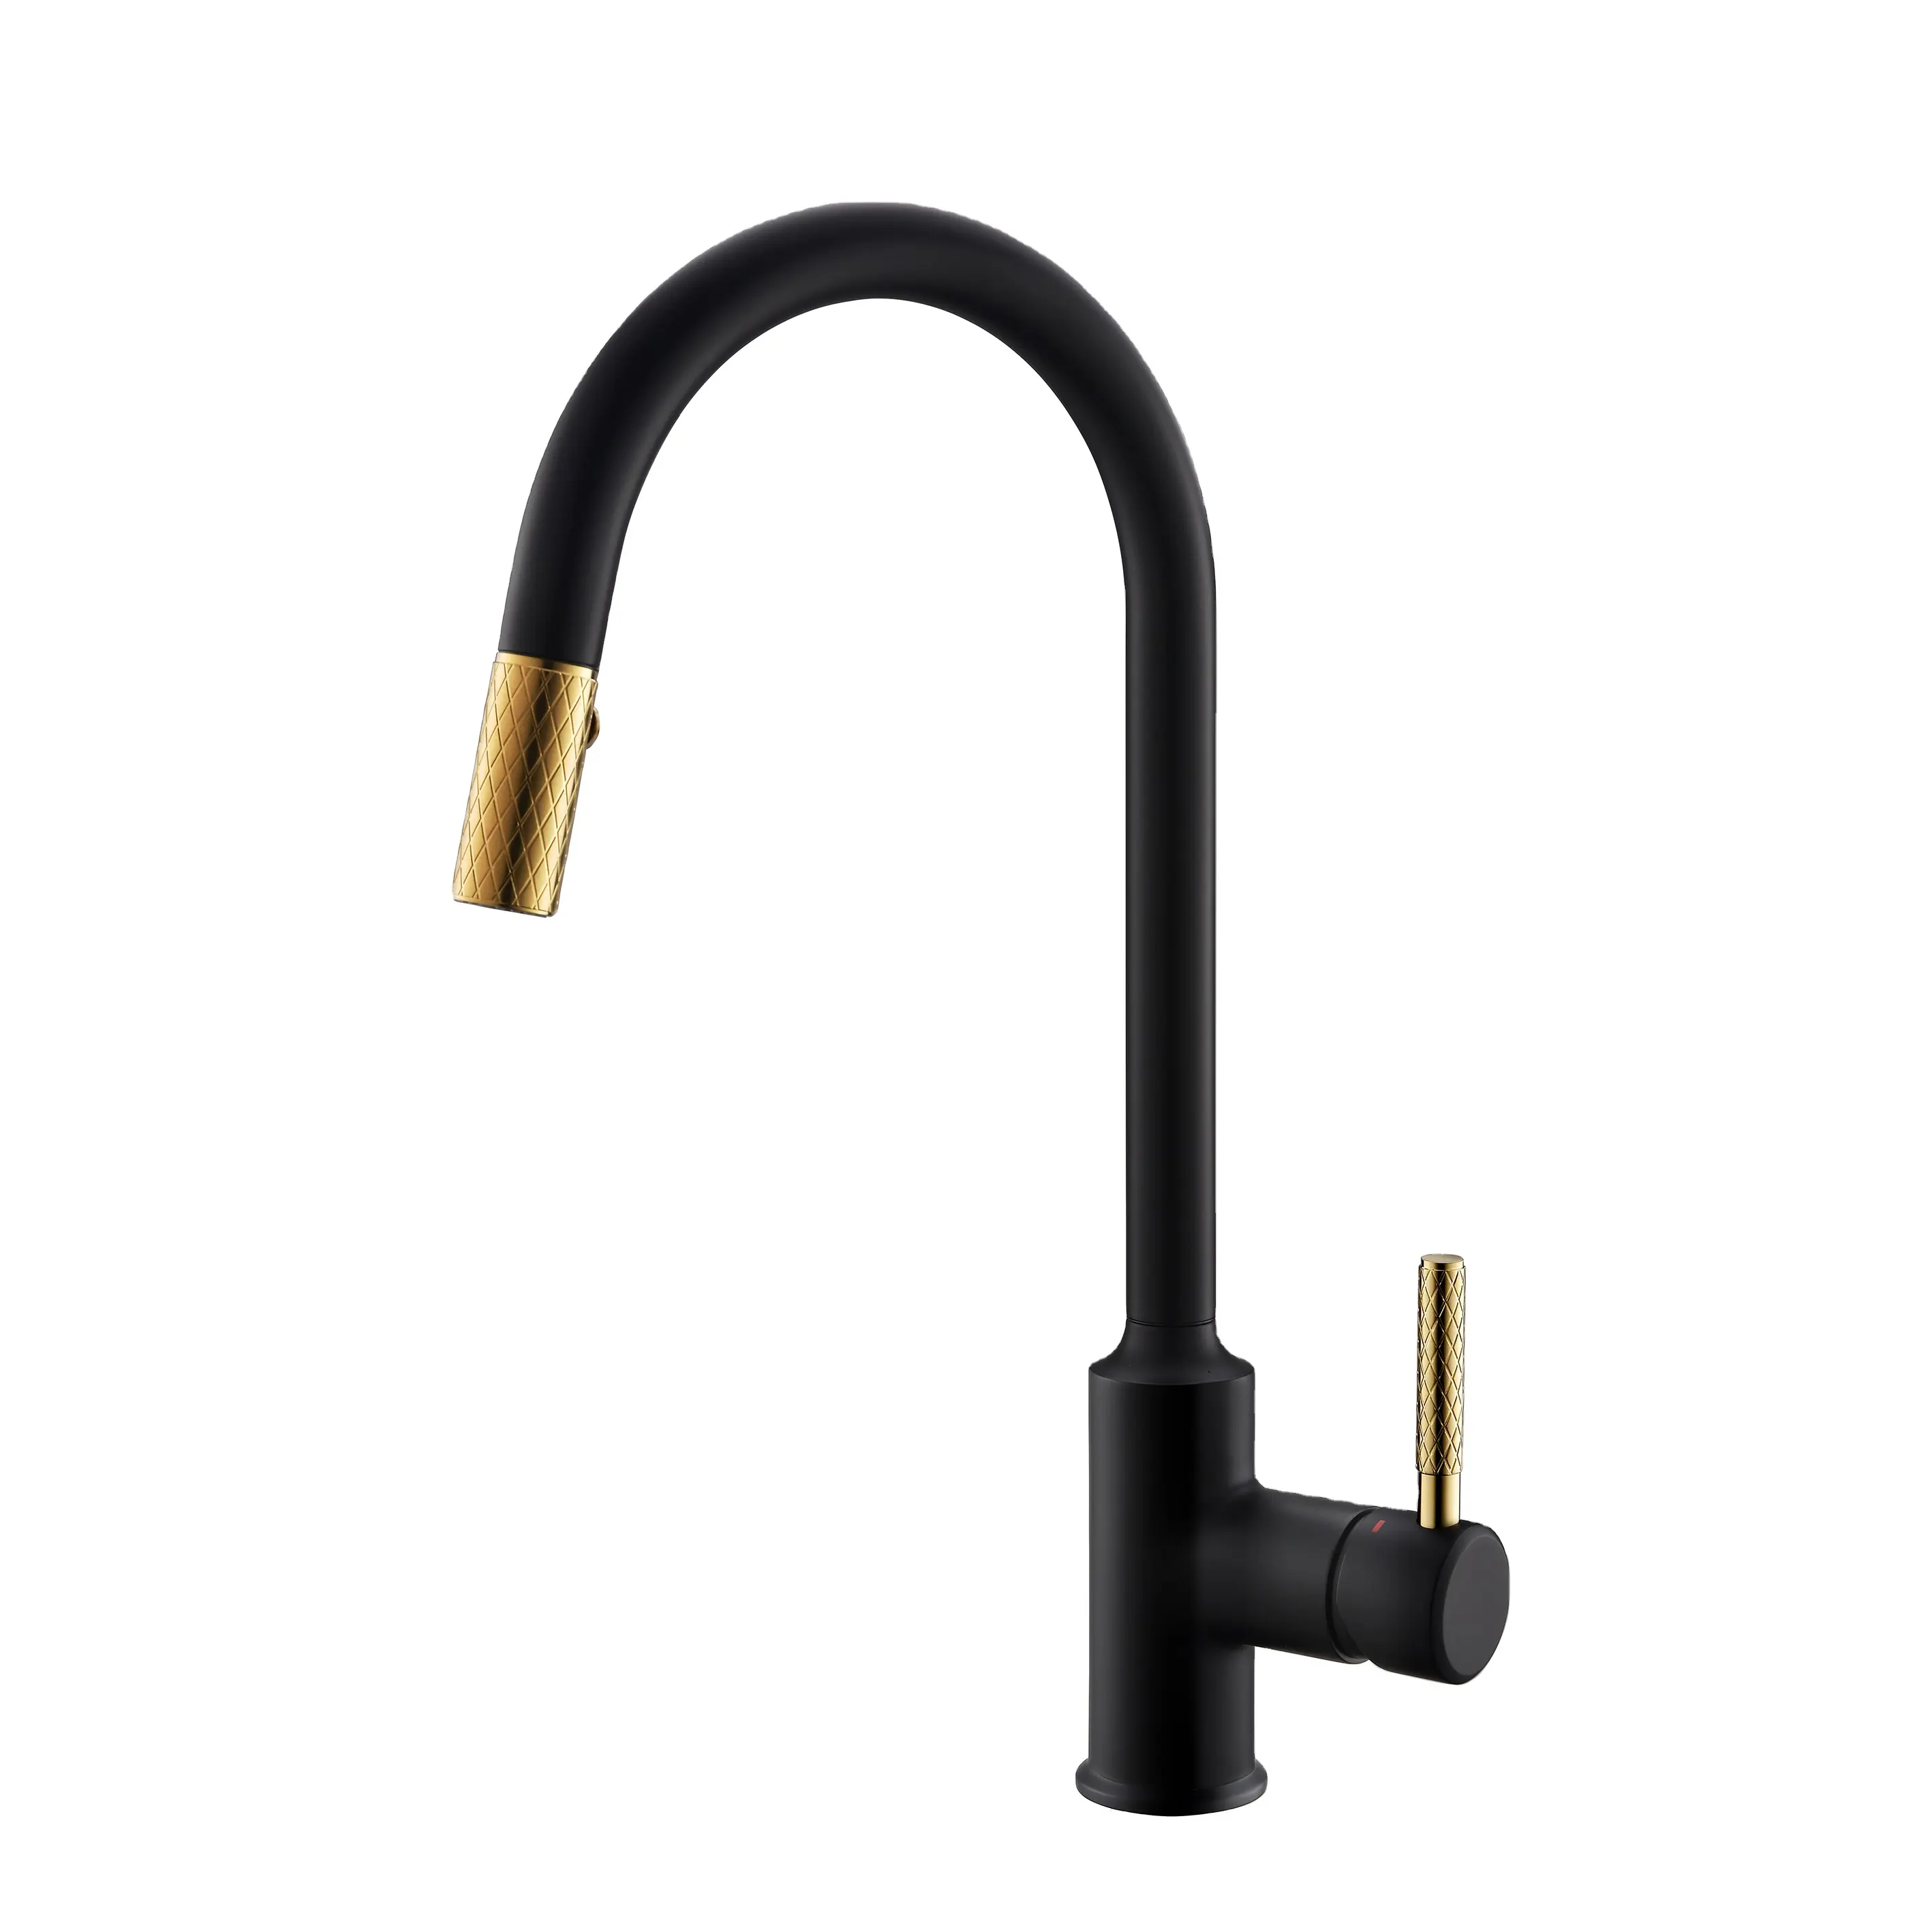 Factory supply matt black and gold kitchen sink water faucet mixer taps with pull out spray head